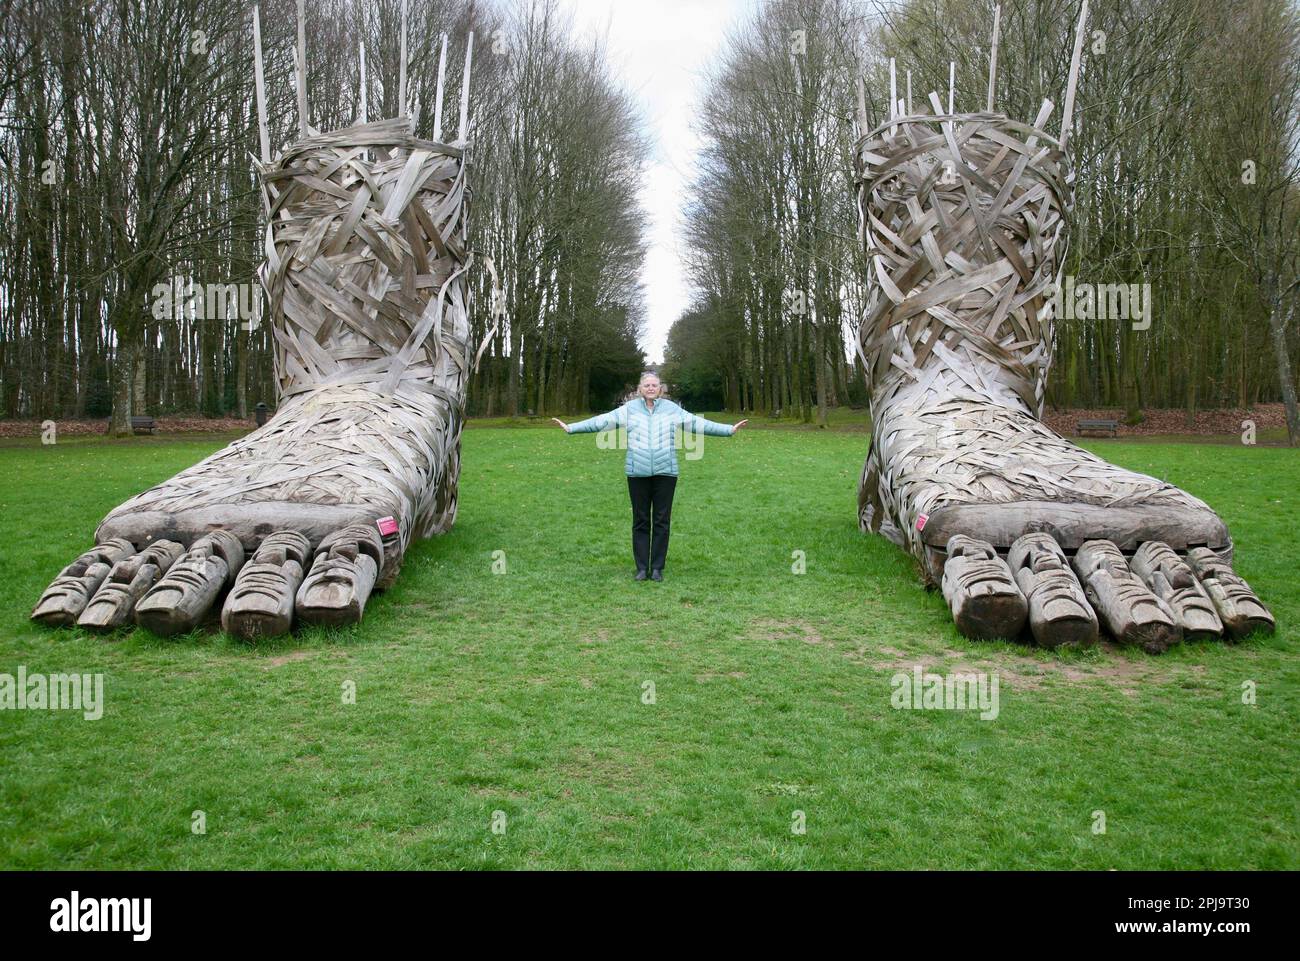 A lady positioned between two large feet at the Chateau de Flers, Normandy, France, Europe Stock Photo